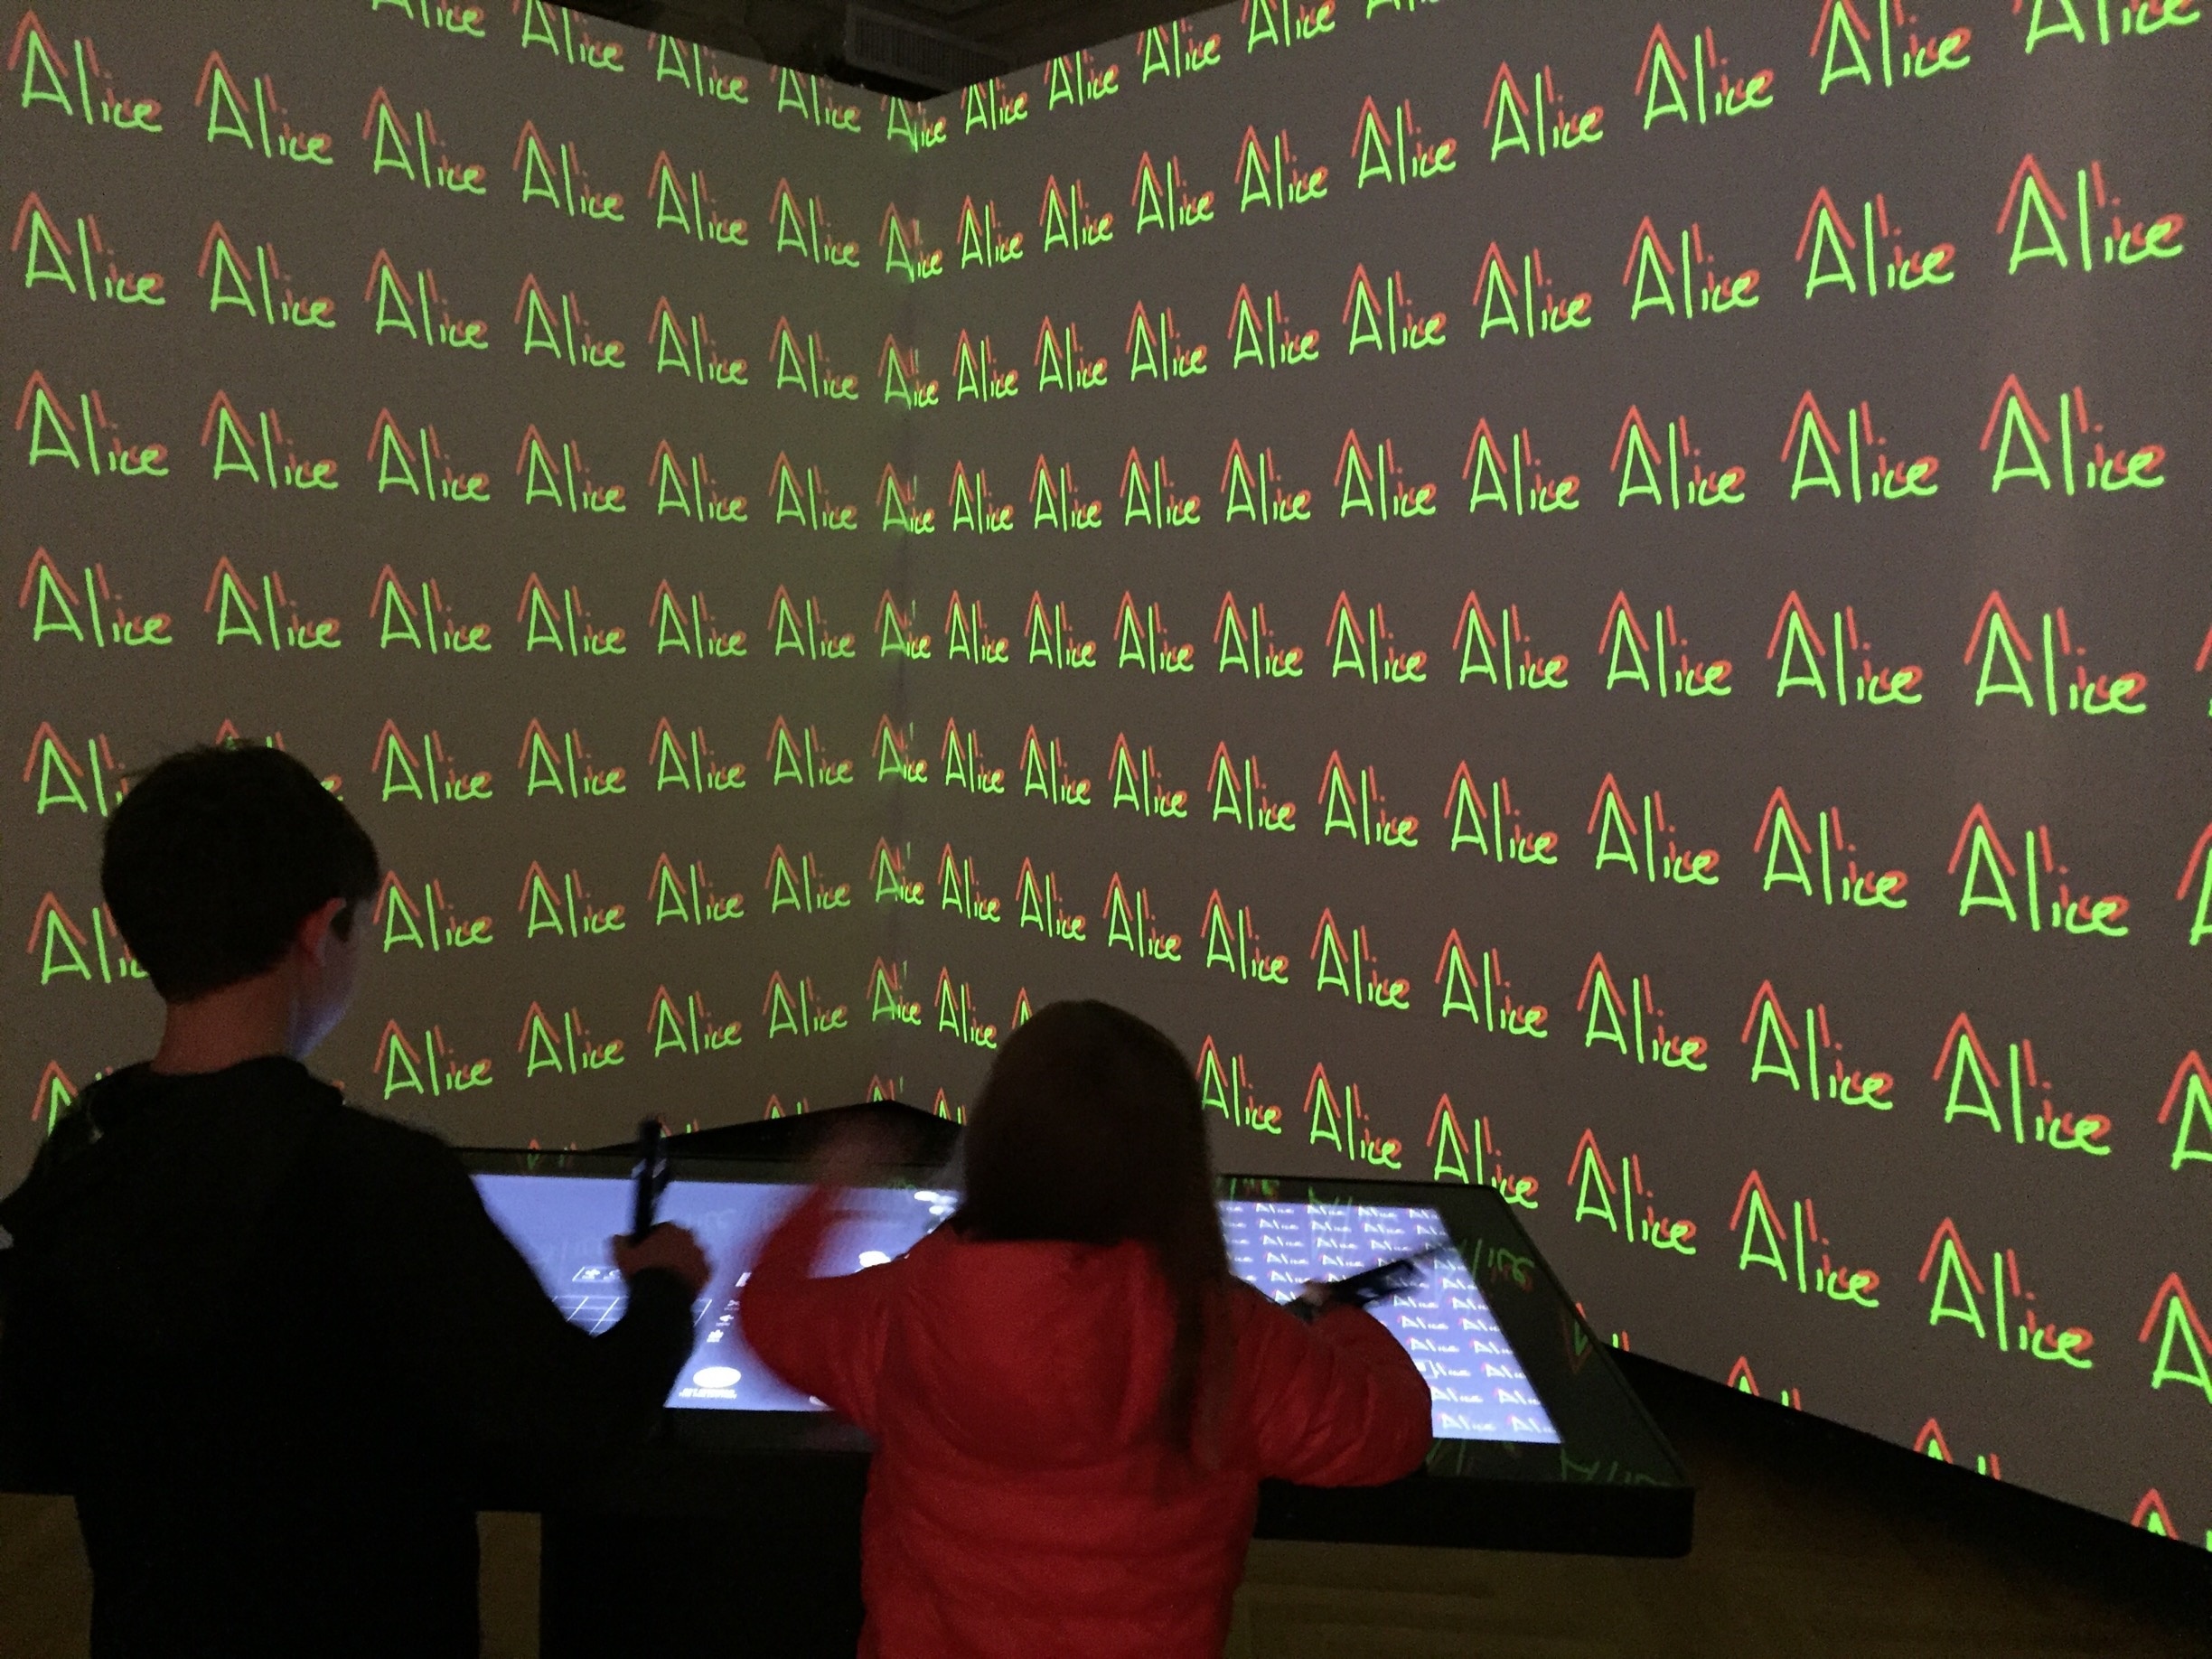 Awesome interactive museum for kids!